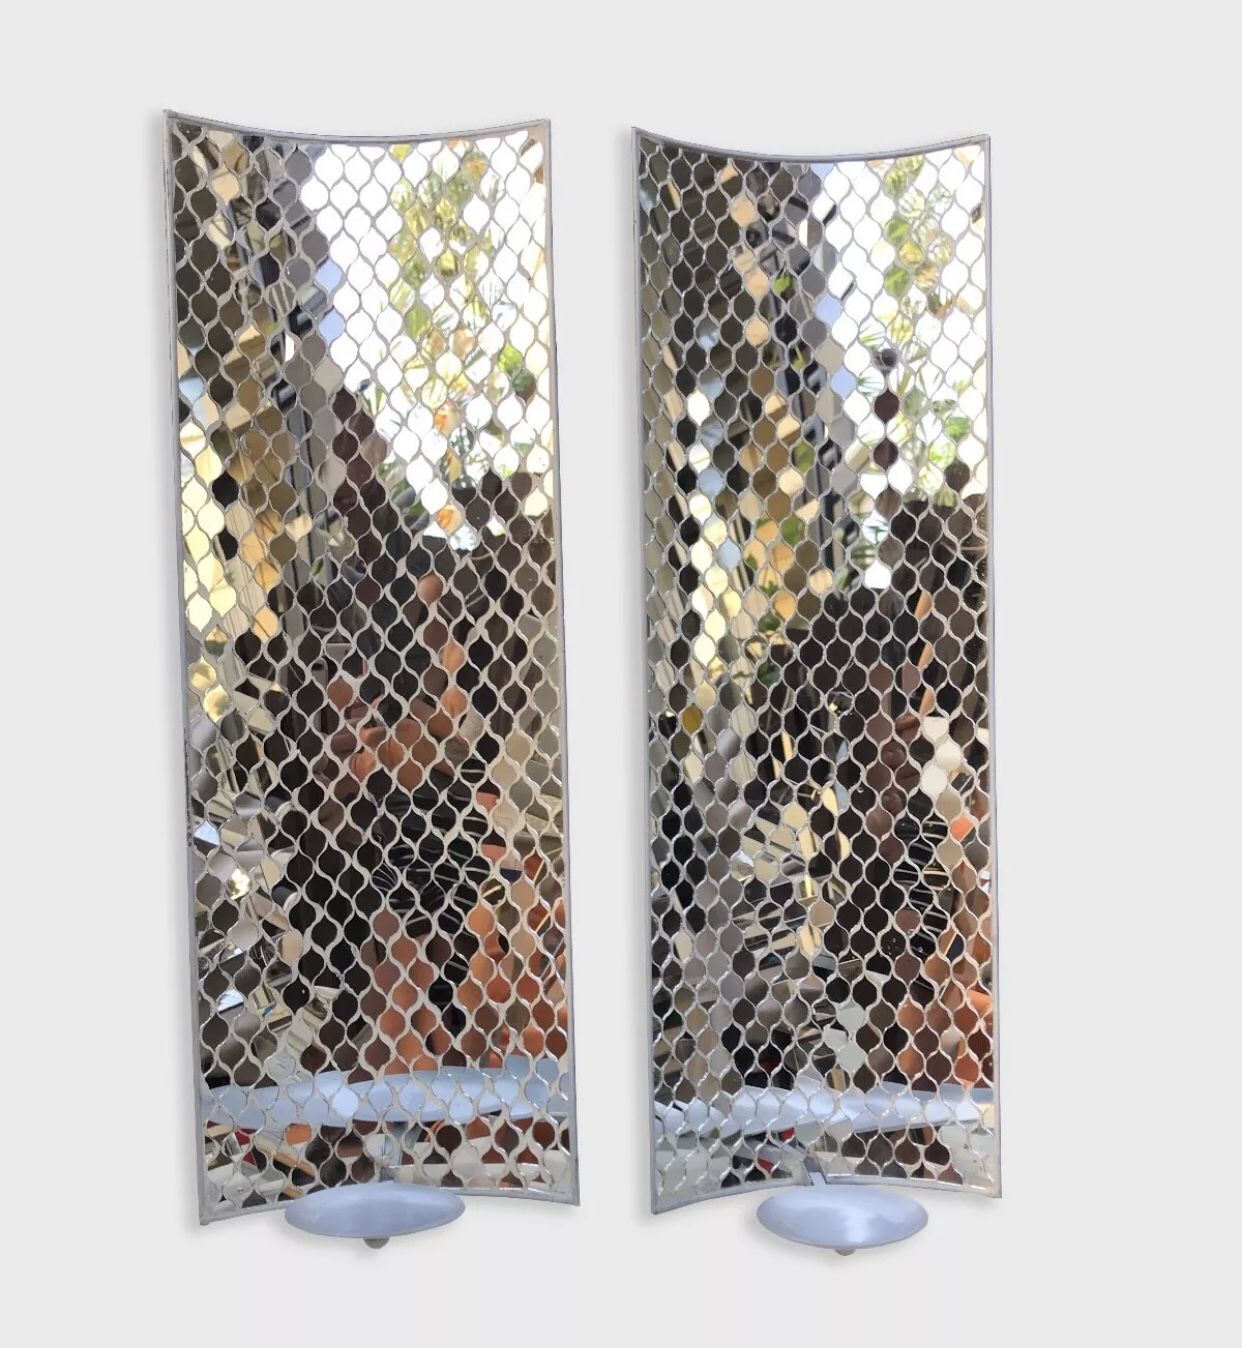 Z Gallerie SconoebFez 24" H Mirror Candle Holders Wall Mountig Set Of 2